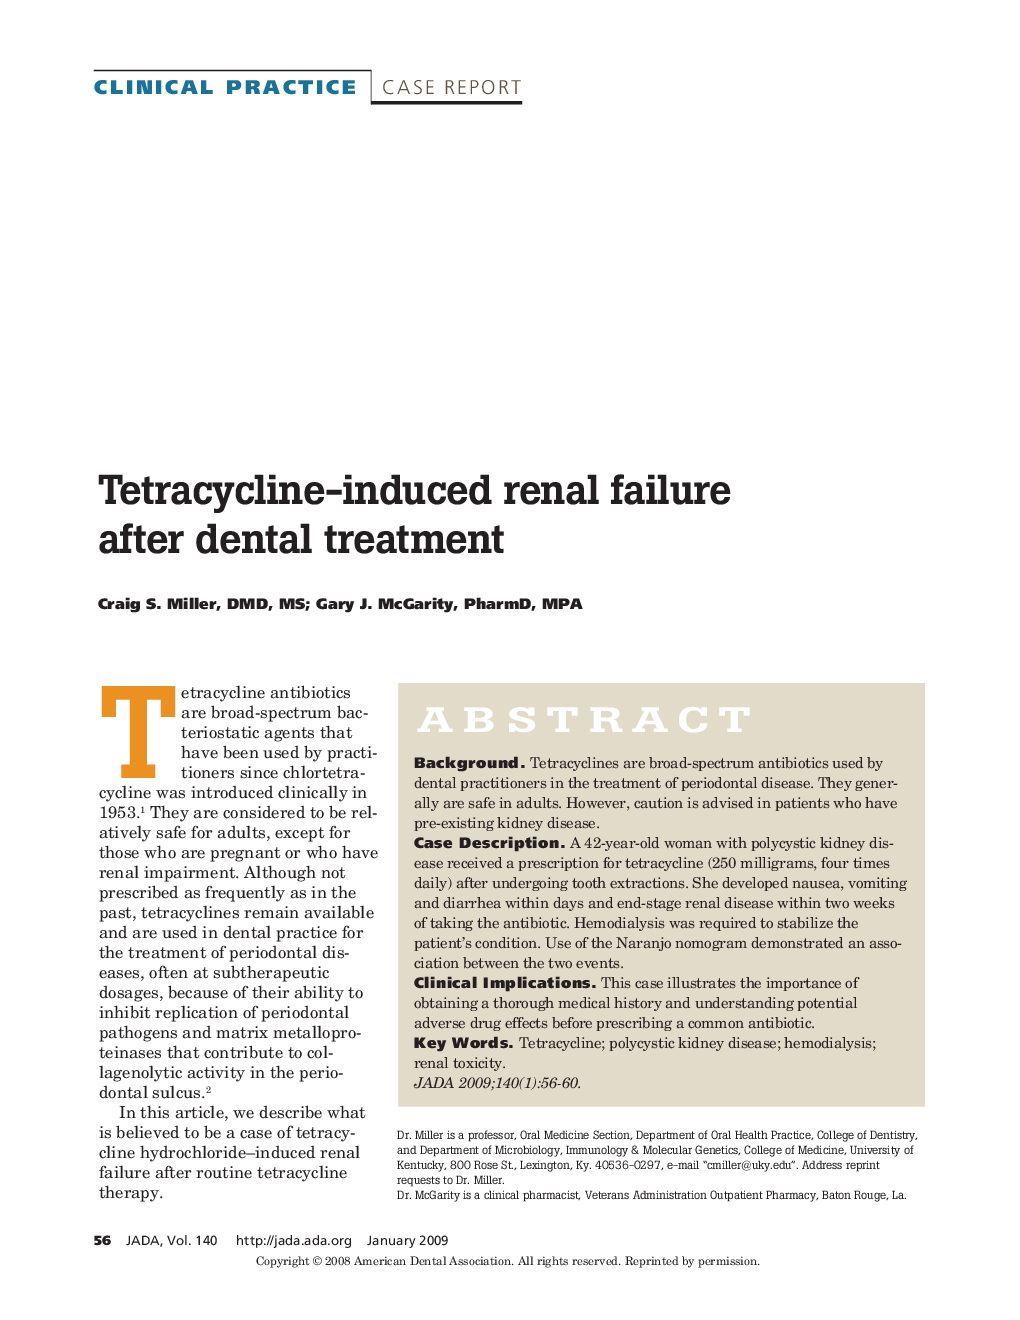 Tetracycline-induced renal failure after dental treatment 